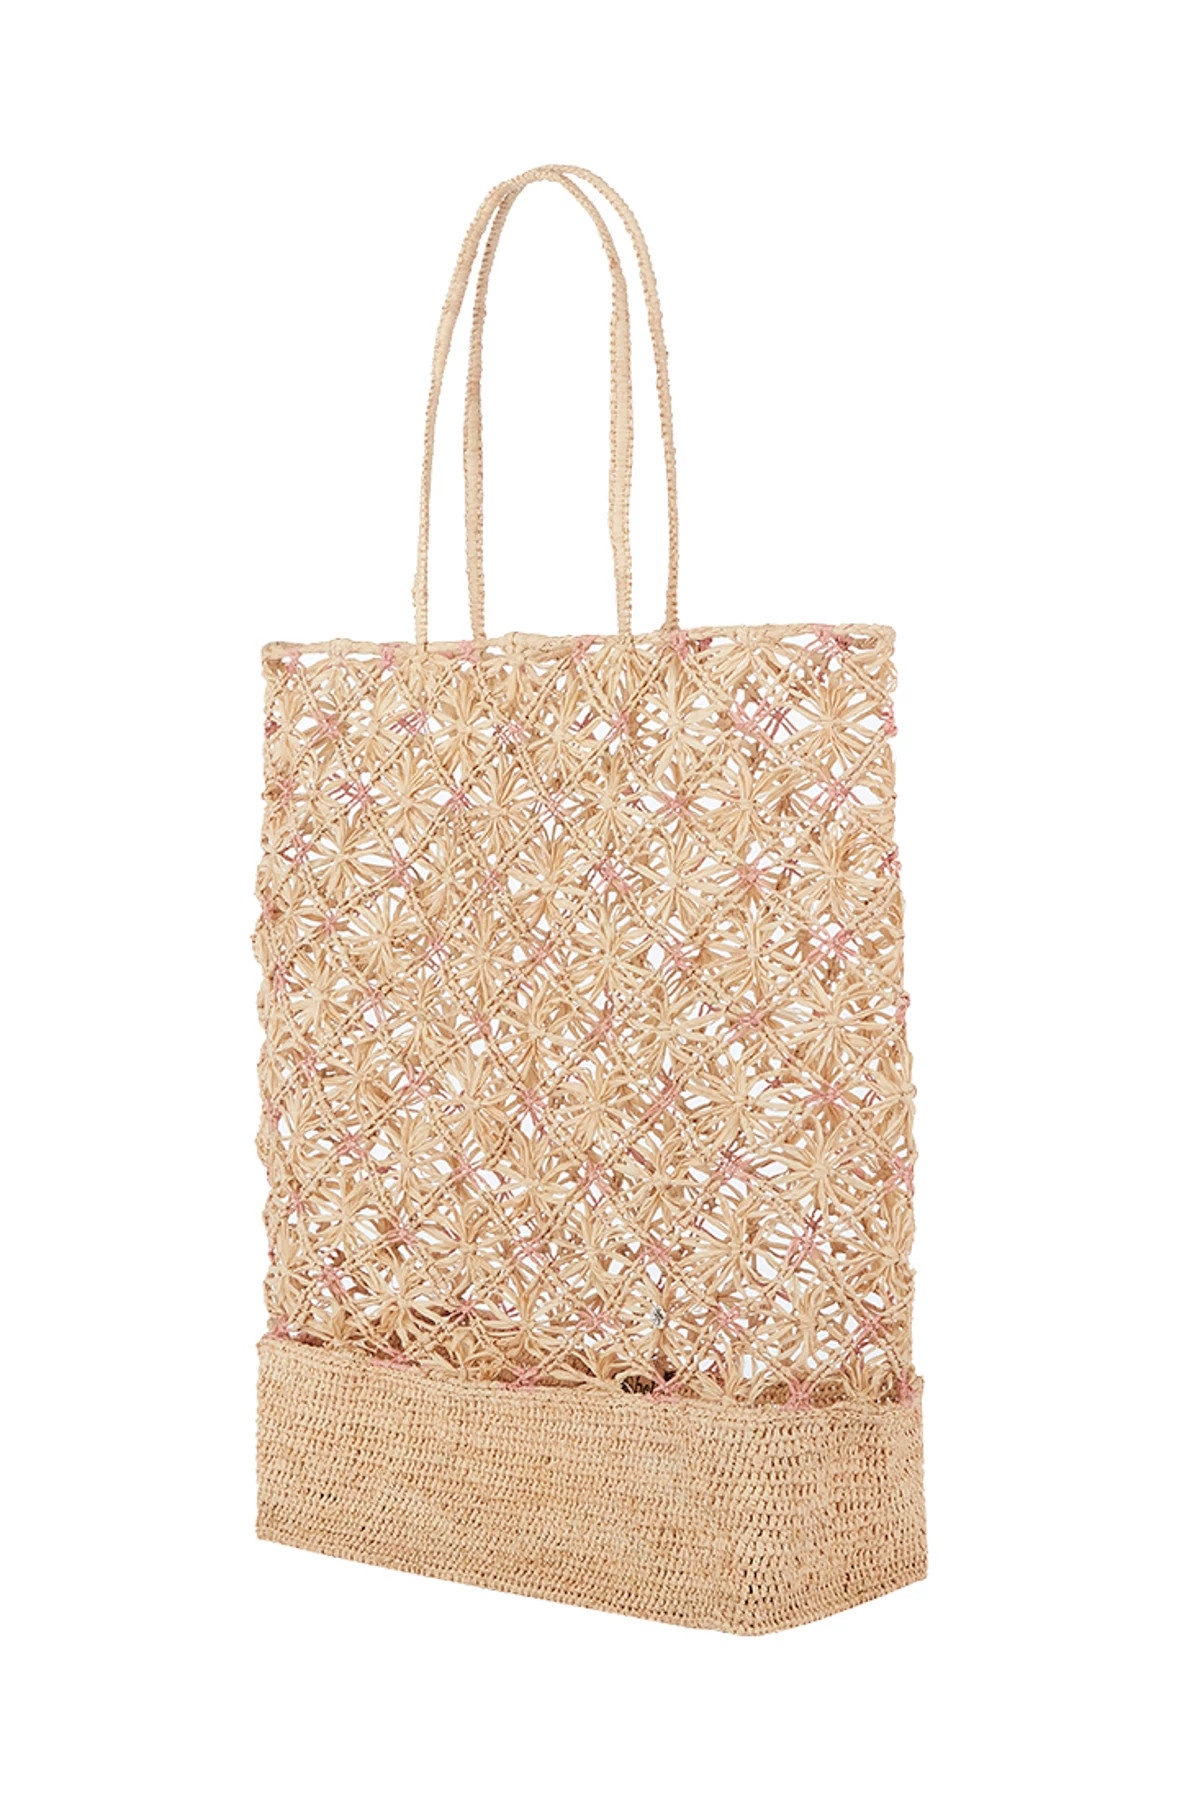 PINK/NATURAL Monrovia Woven Tote image number 3